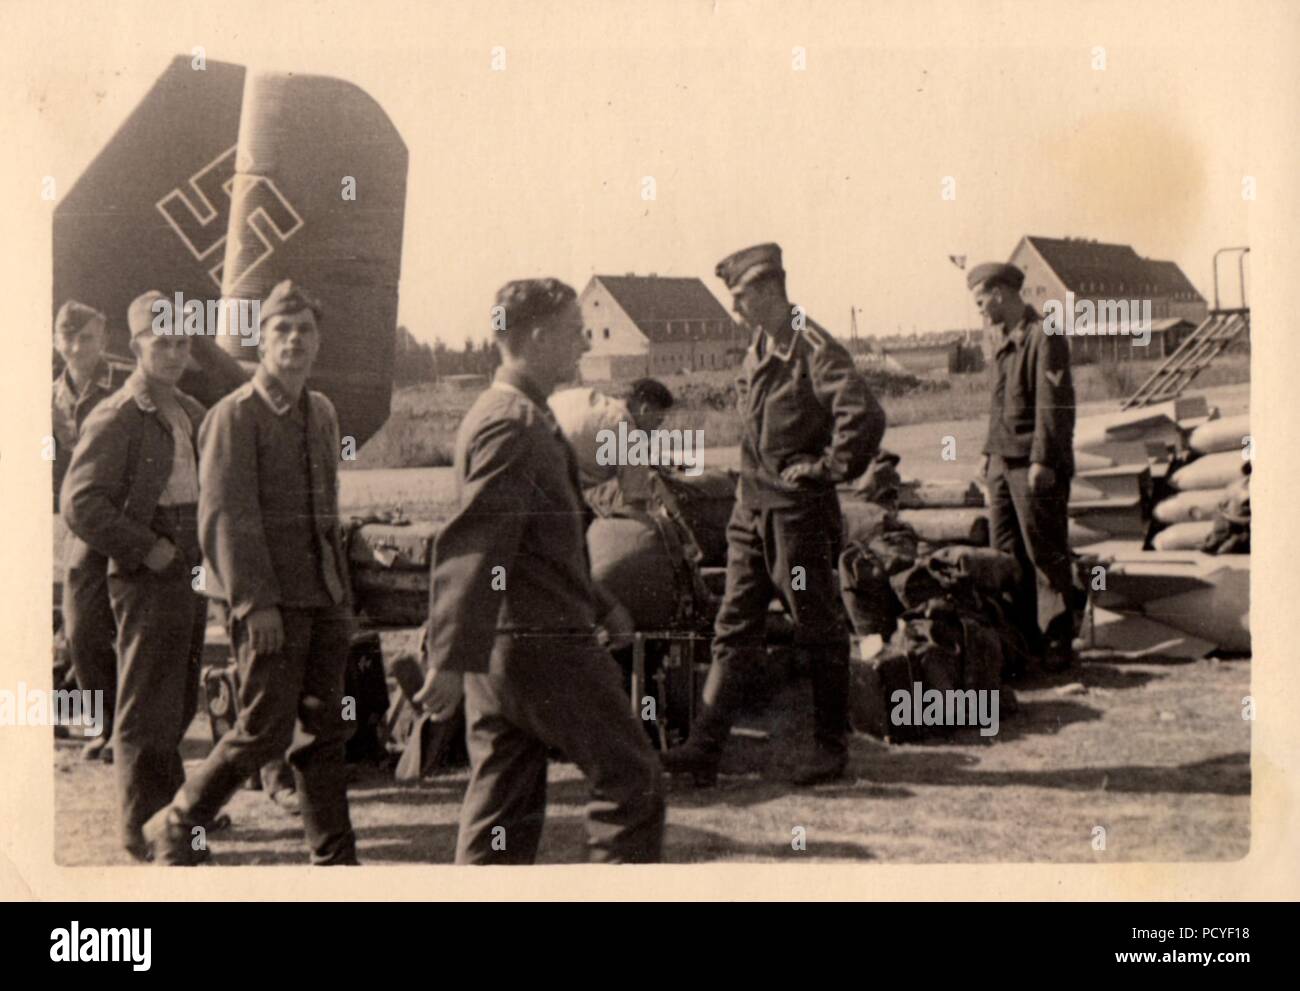 Image from the photo album of Oberfeldwebel Gotthilf Benseler of 9. Staffel, Kampfgeschwader 3: Armourers of 9. Staffel, Kampfgeschwader 3 at the bomb dump, during the campaign against Poland in September 1939. Stock Photo